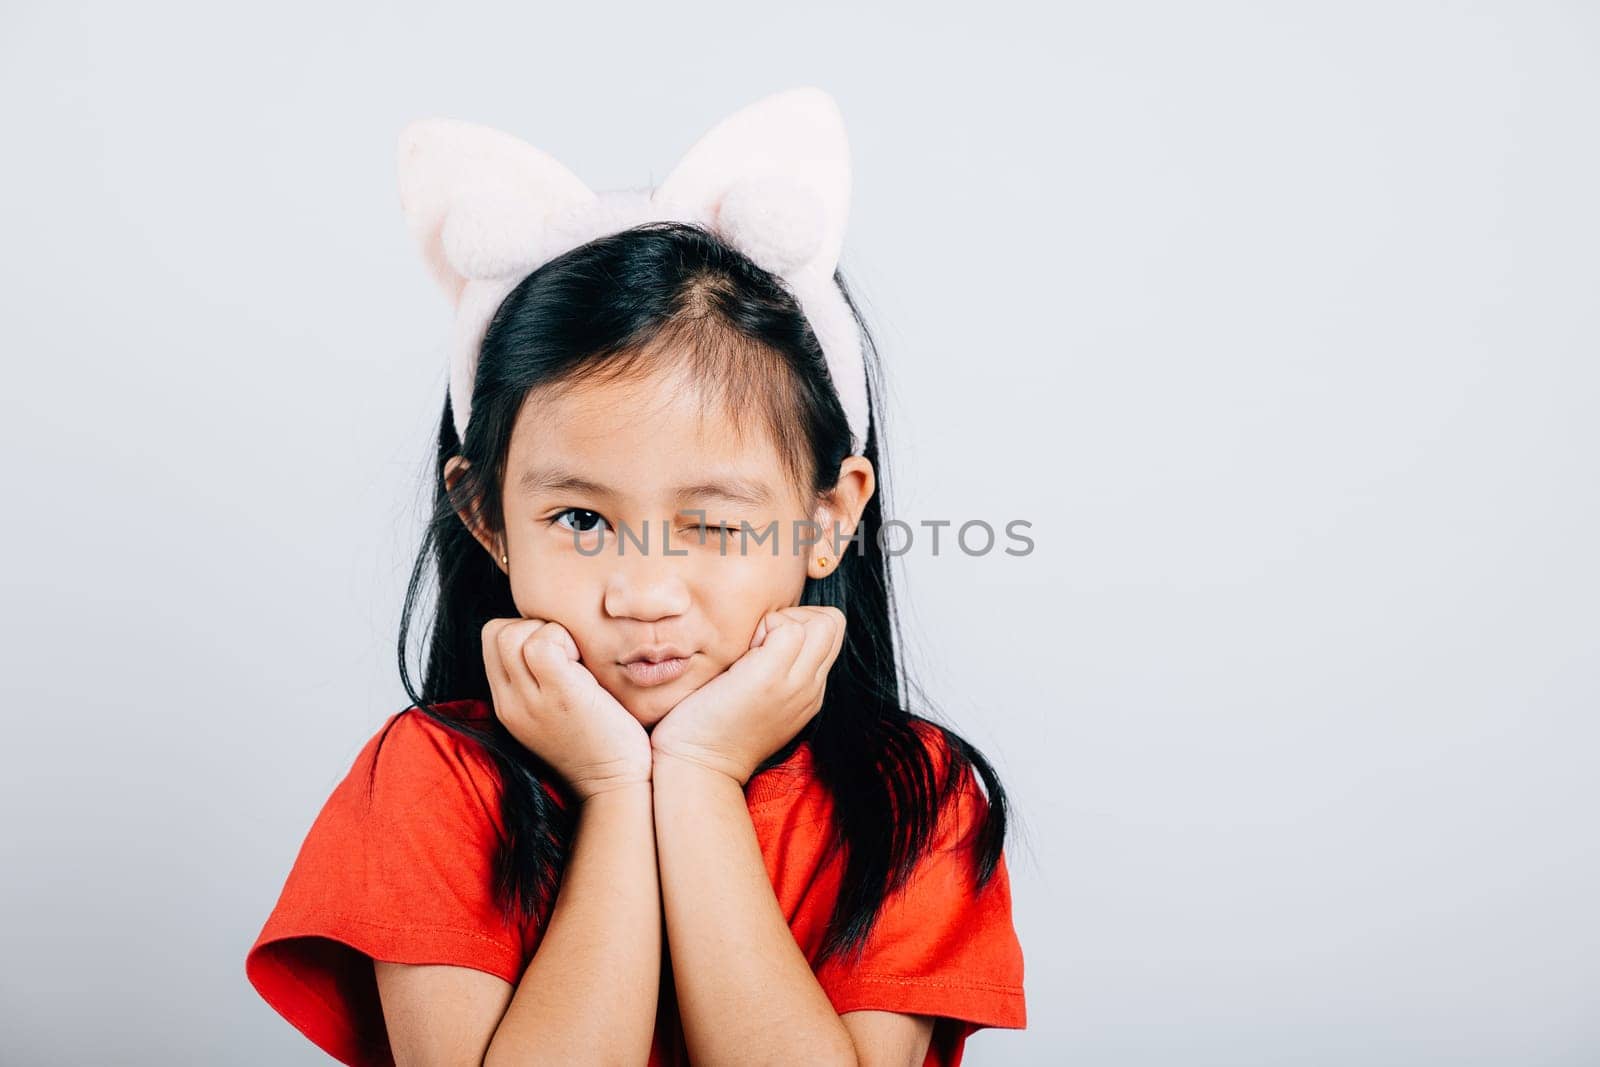 A joyful Asian kid girl in a red t-shirt beams with happiness her open mouth revealing a big smile and confidence. Isolated portrait of a cheerful child on a white background. by Sorapop